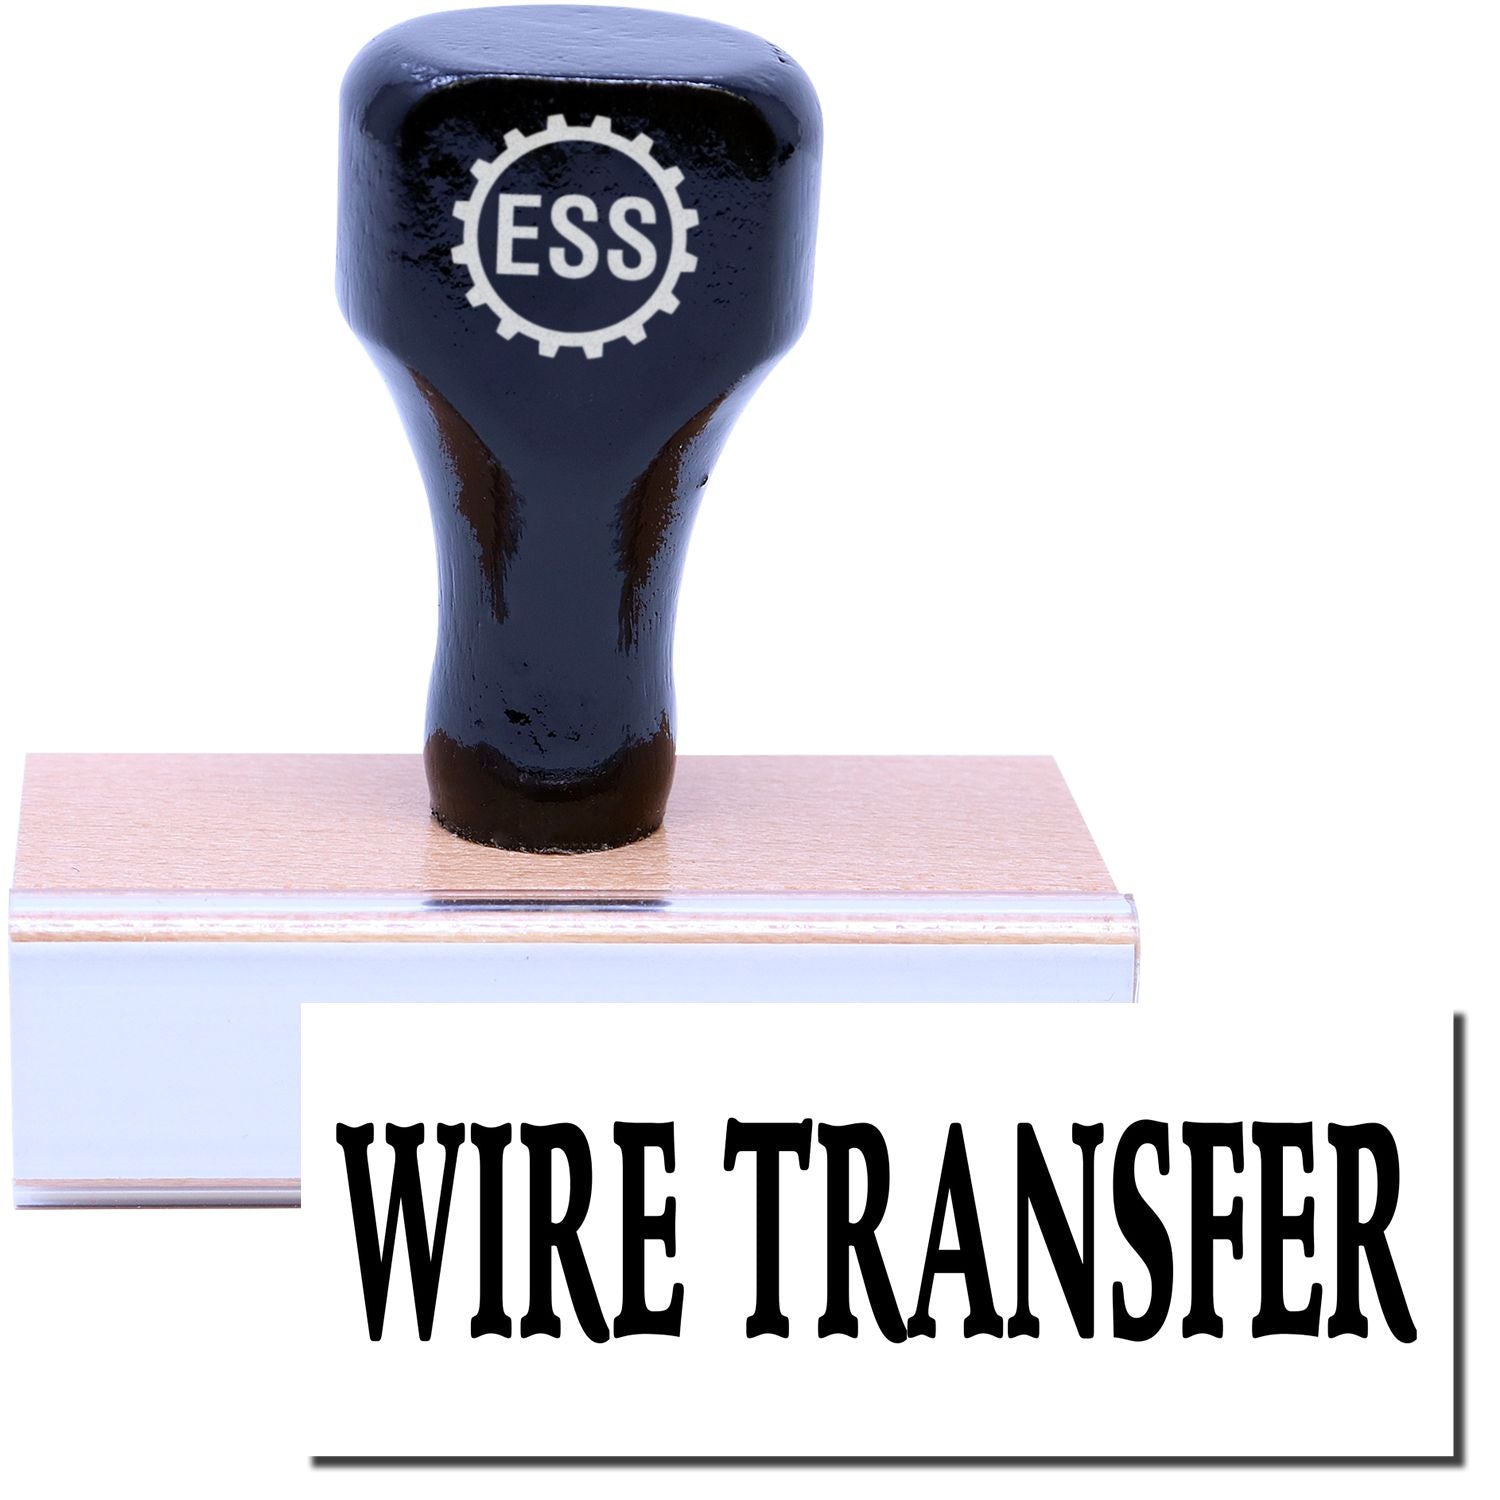 A stock office rubber stamp with a stamped image showing how the text "WIRE TRANSFER" in a large font is displayed after stamping.